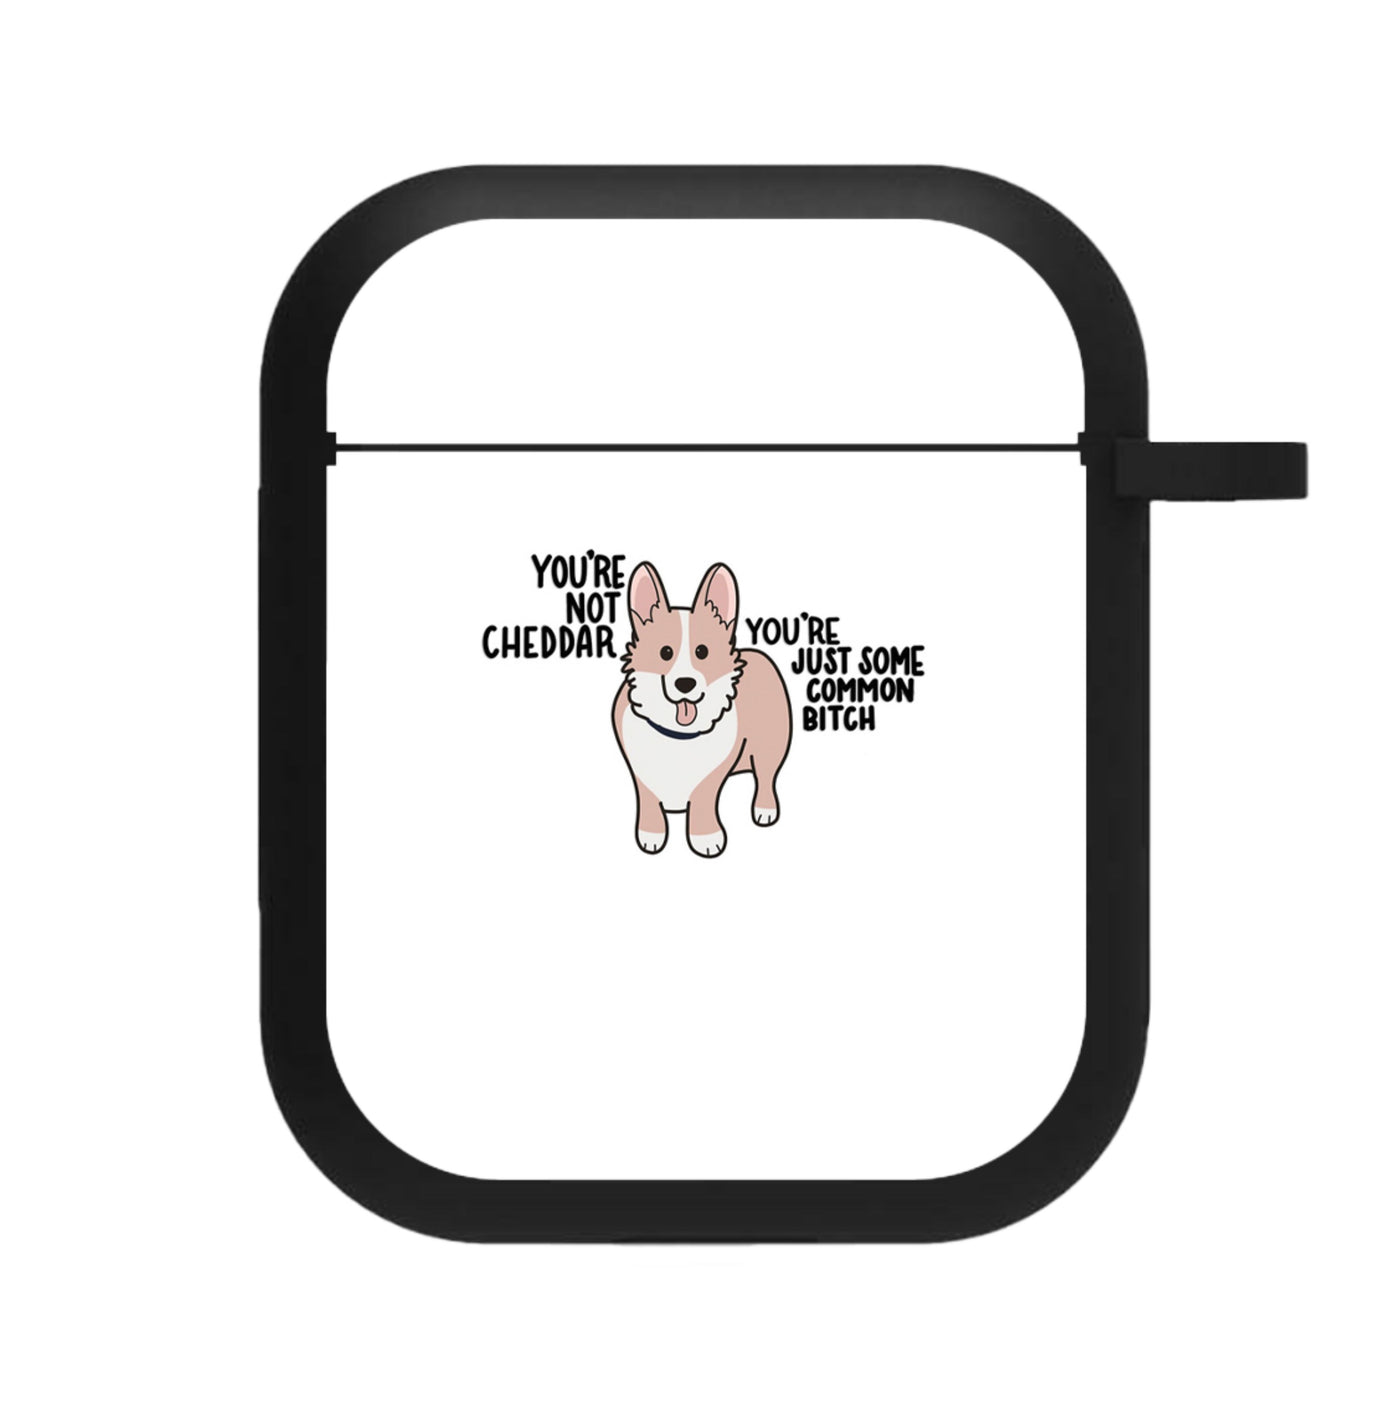 You're Not Cheddar - Brooklyn Nine-Nine AirPods Case